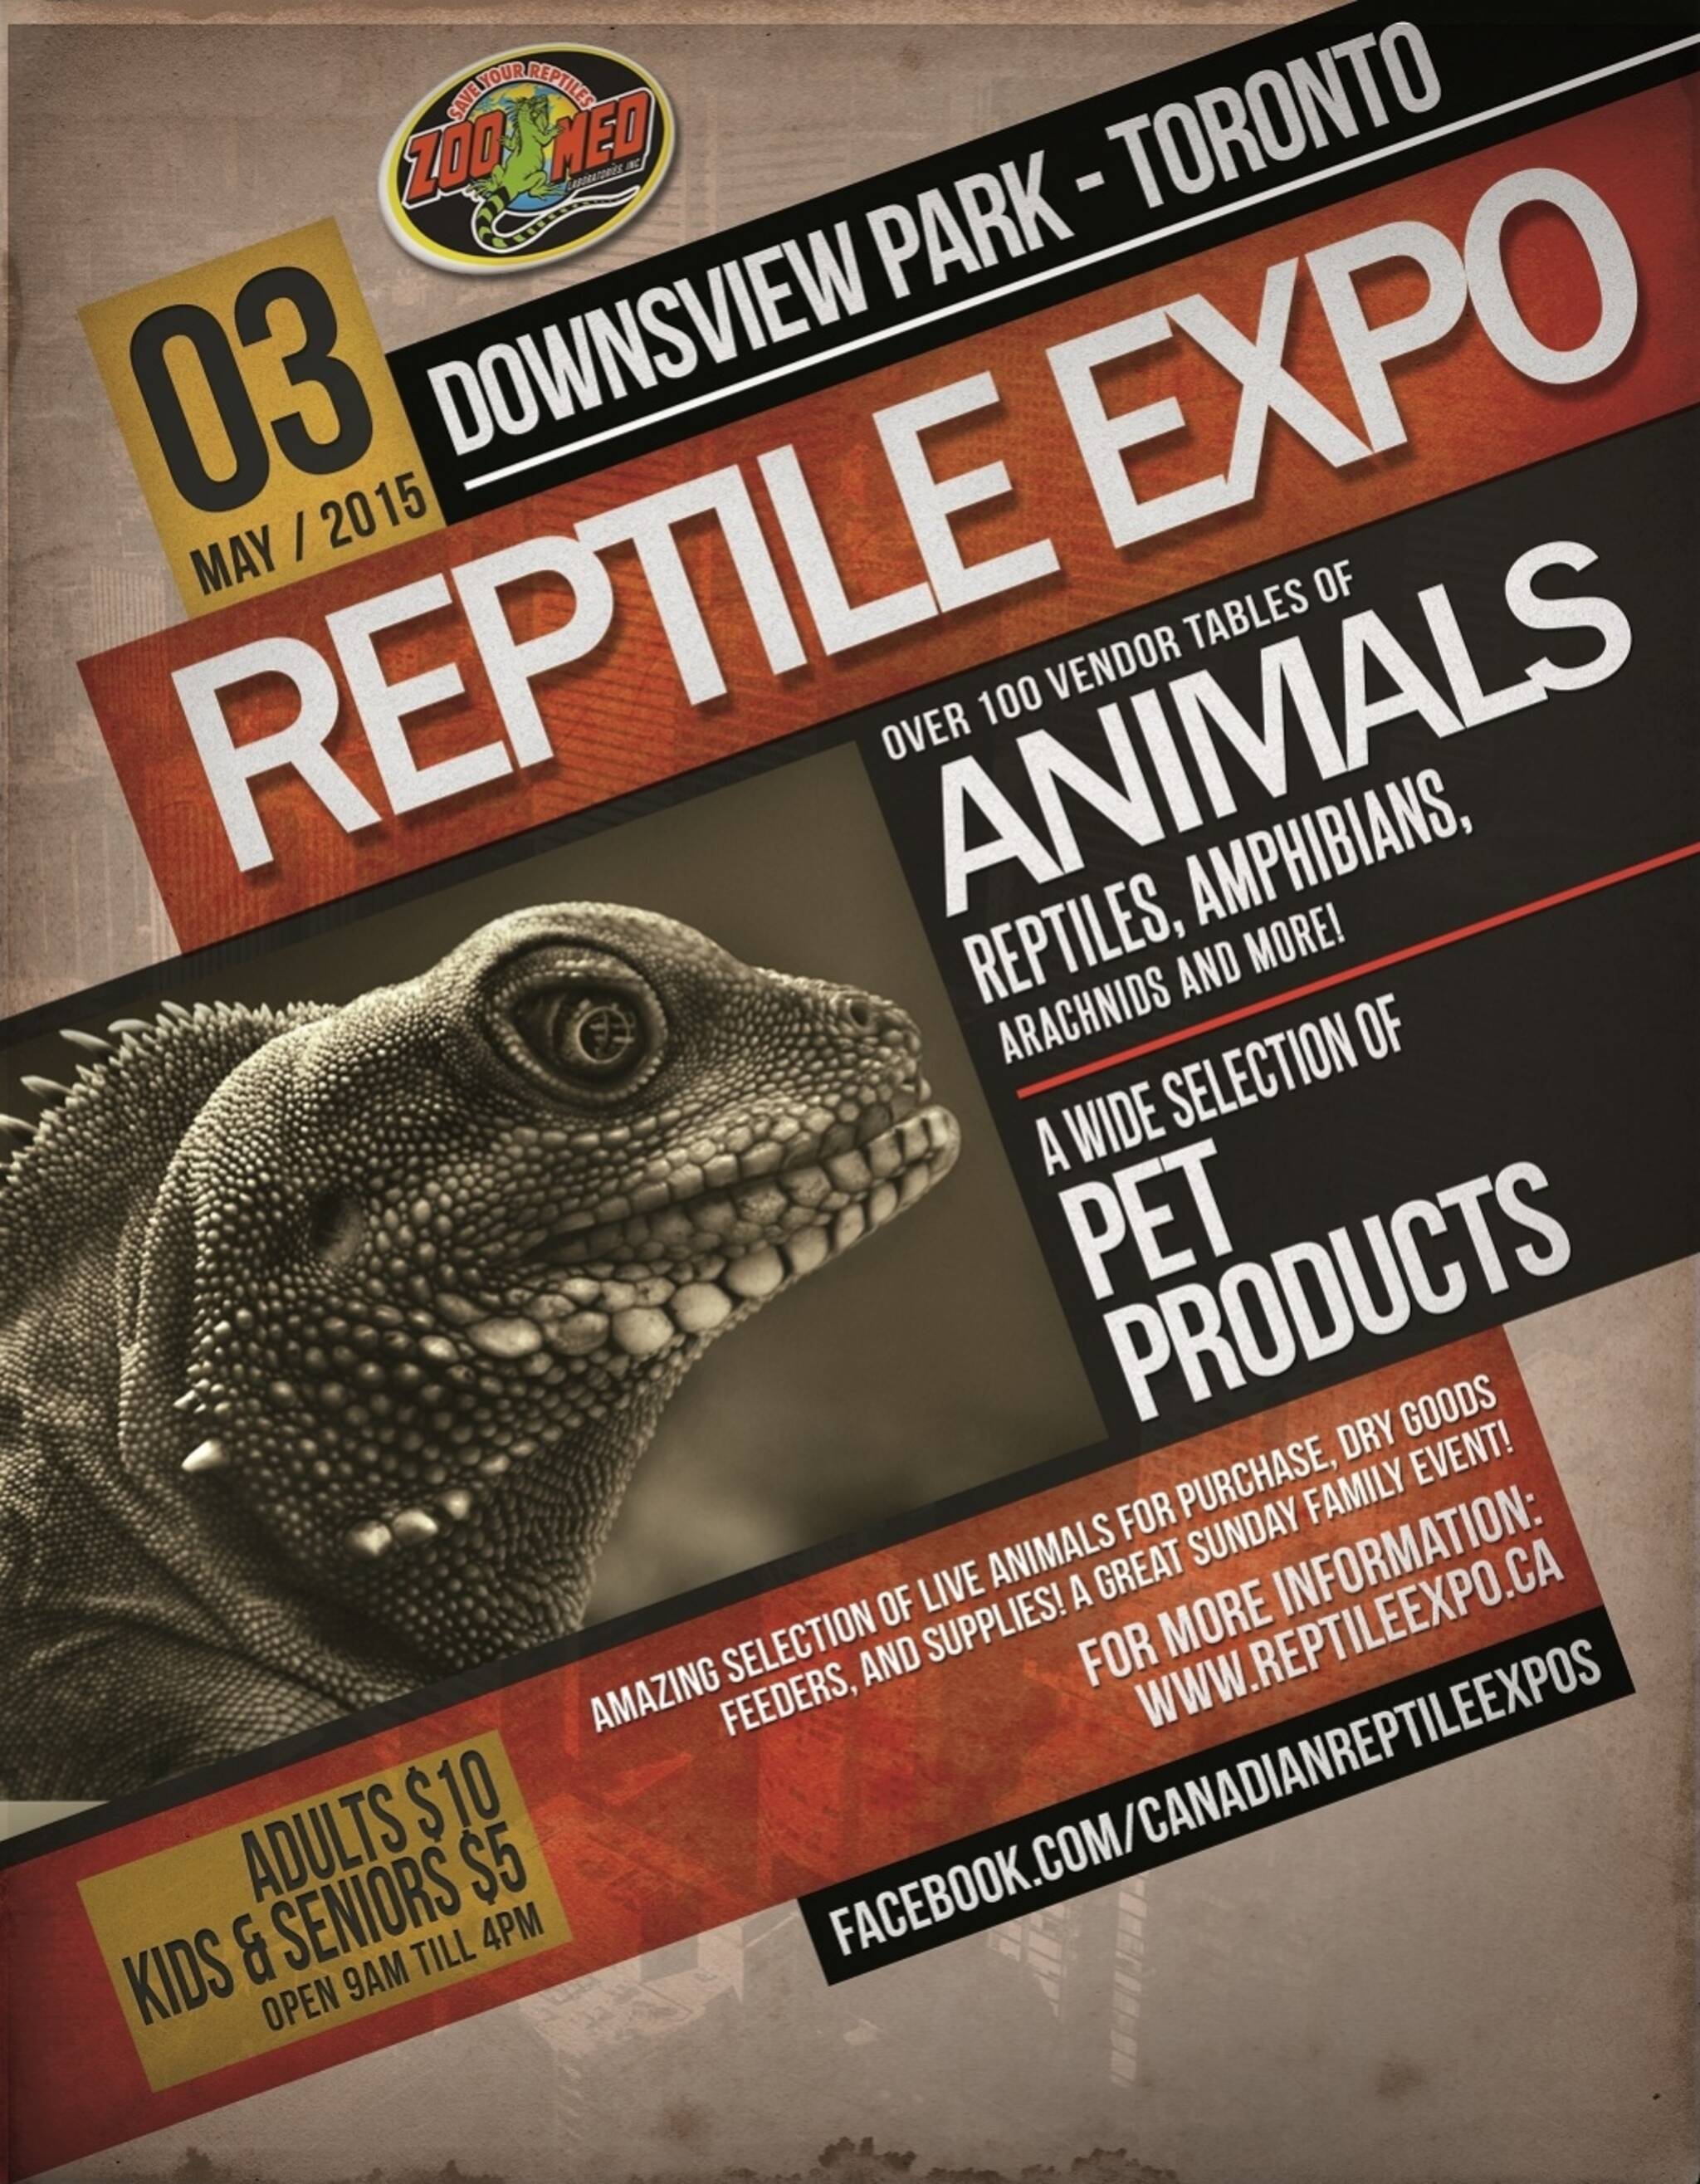 Toronto Reptile Expo Sunday, May 3, 2015 Downsview Park